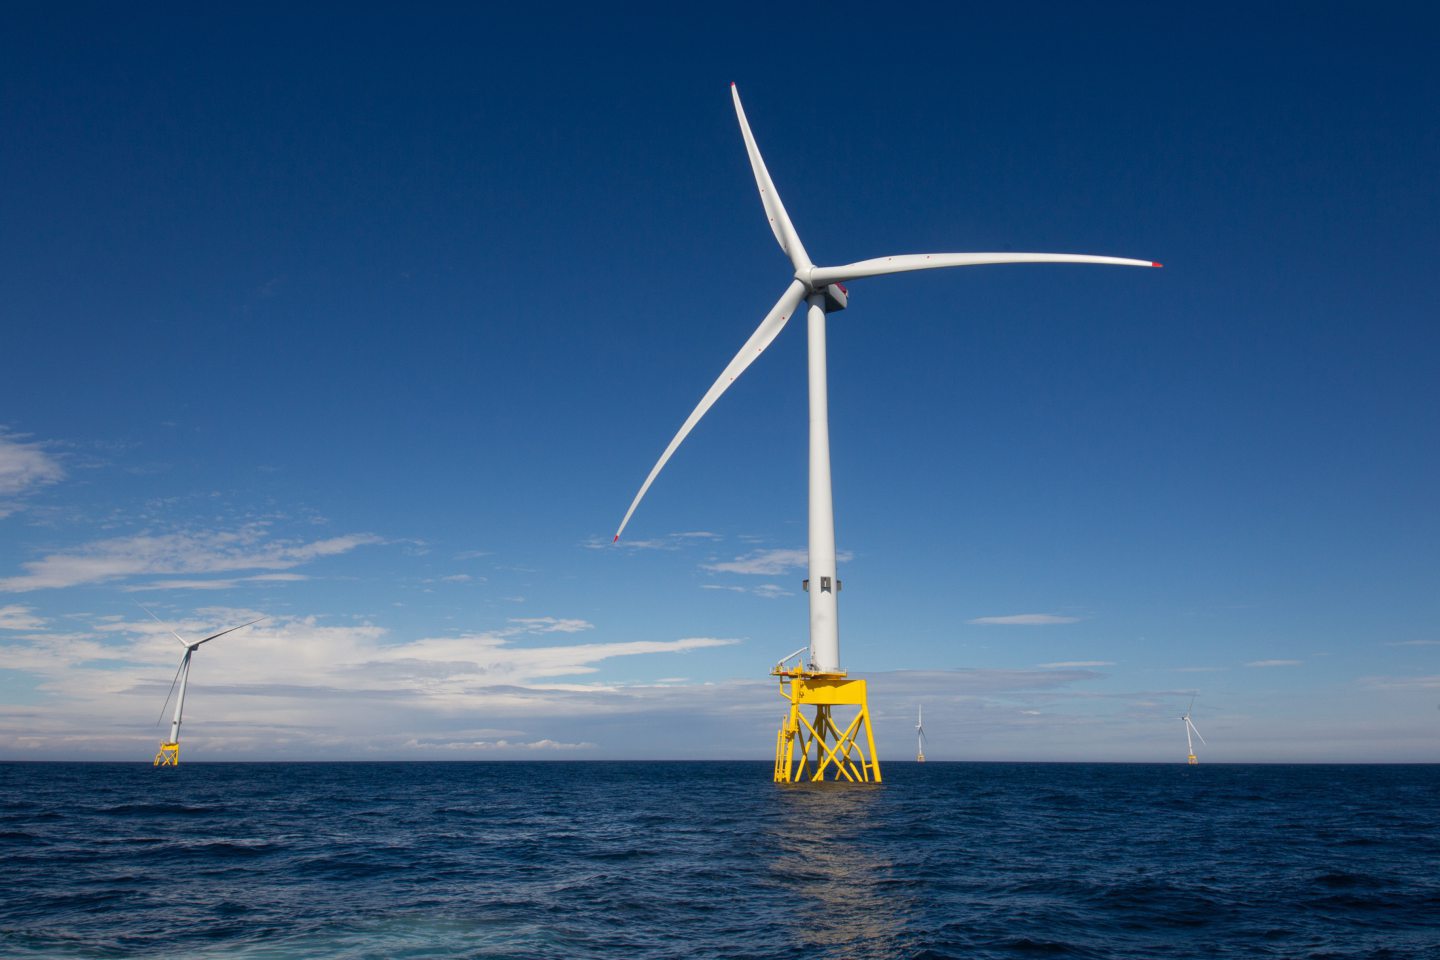 Standardised wind contracts could be a breath of fresh air for decarbonisation